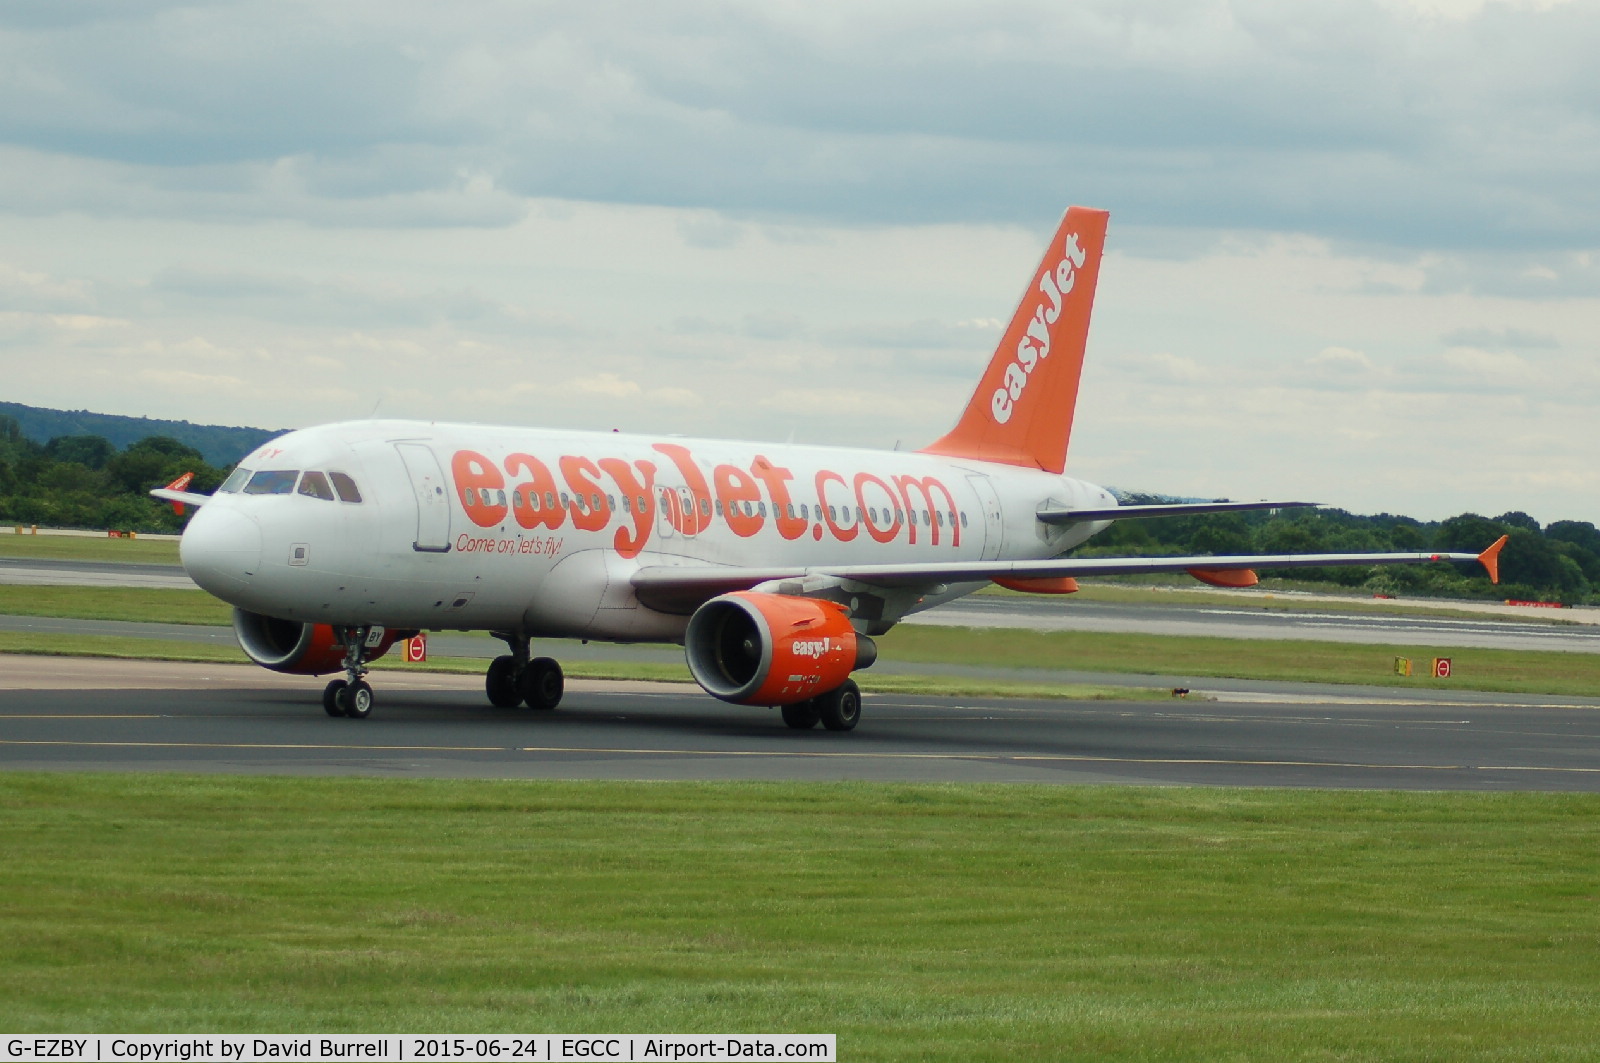 G-EZBY, 2007 Airbus A319-111 C/N 3176, EasyJet Airbus A319-111 taxiing at Manchester Airport after arrival.